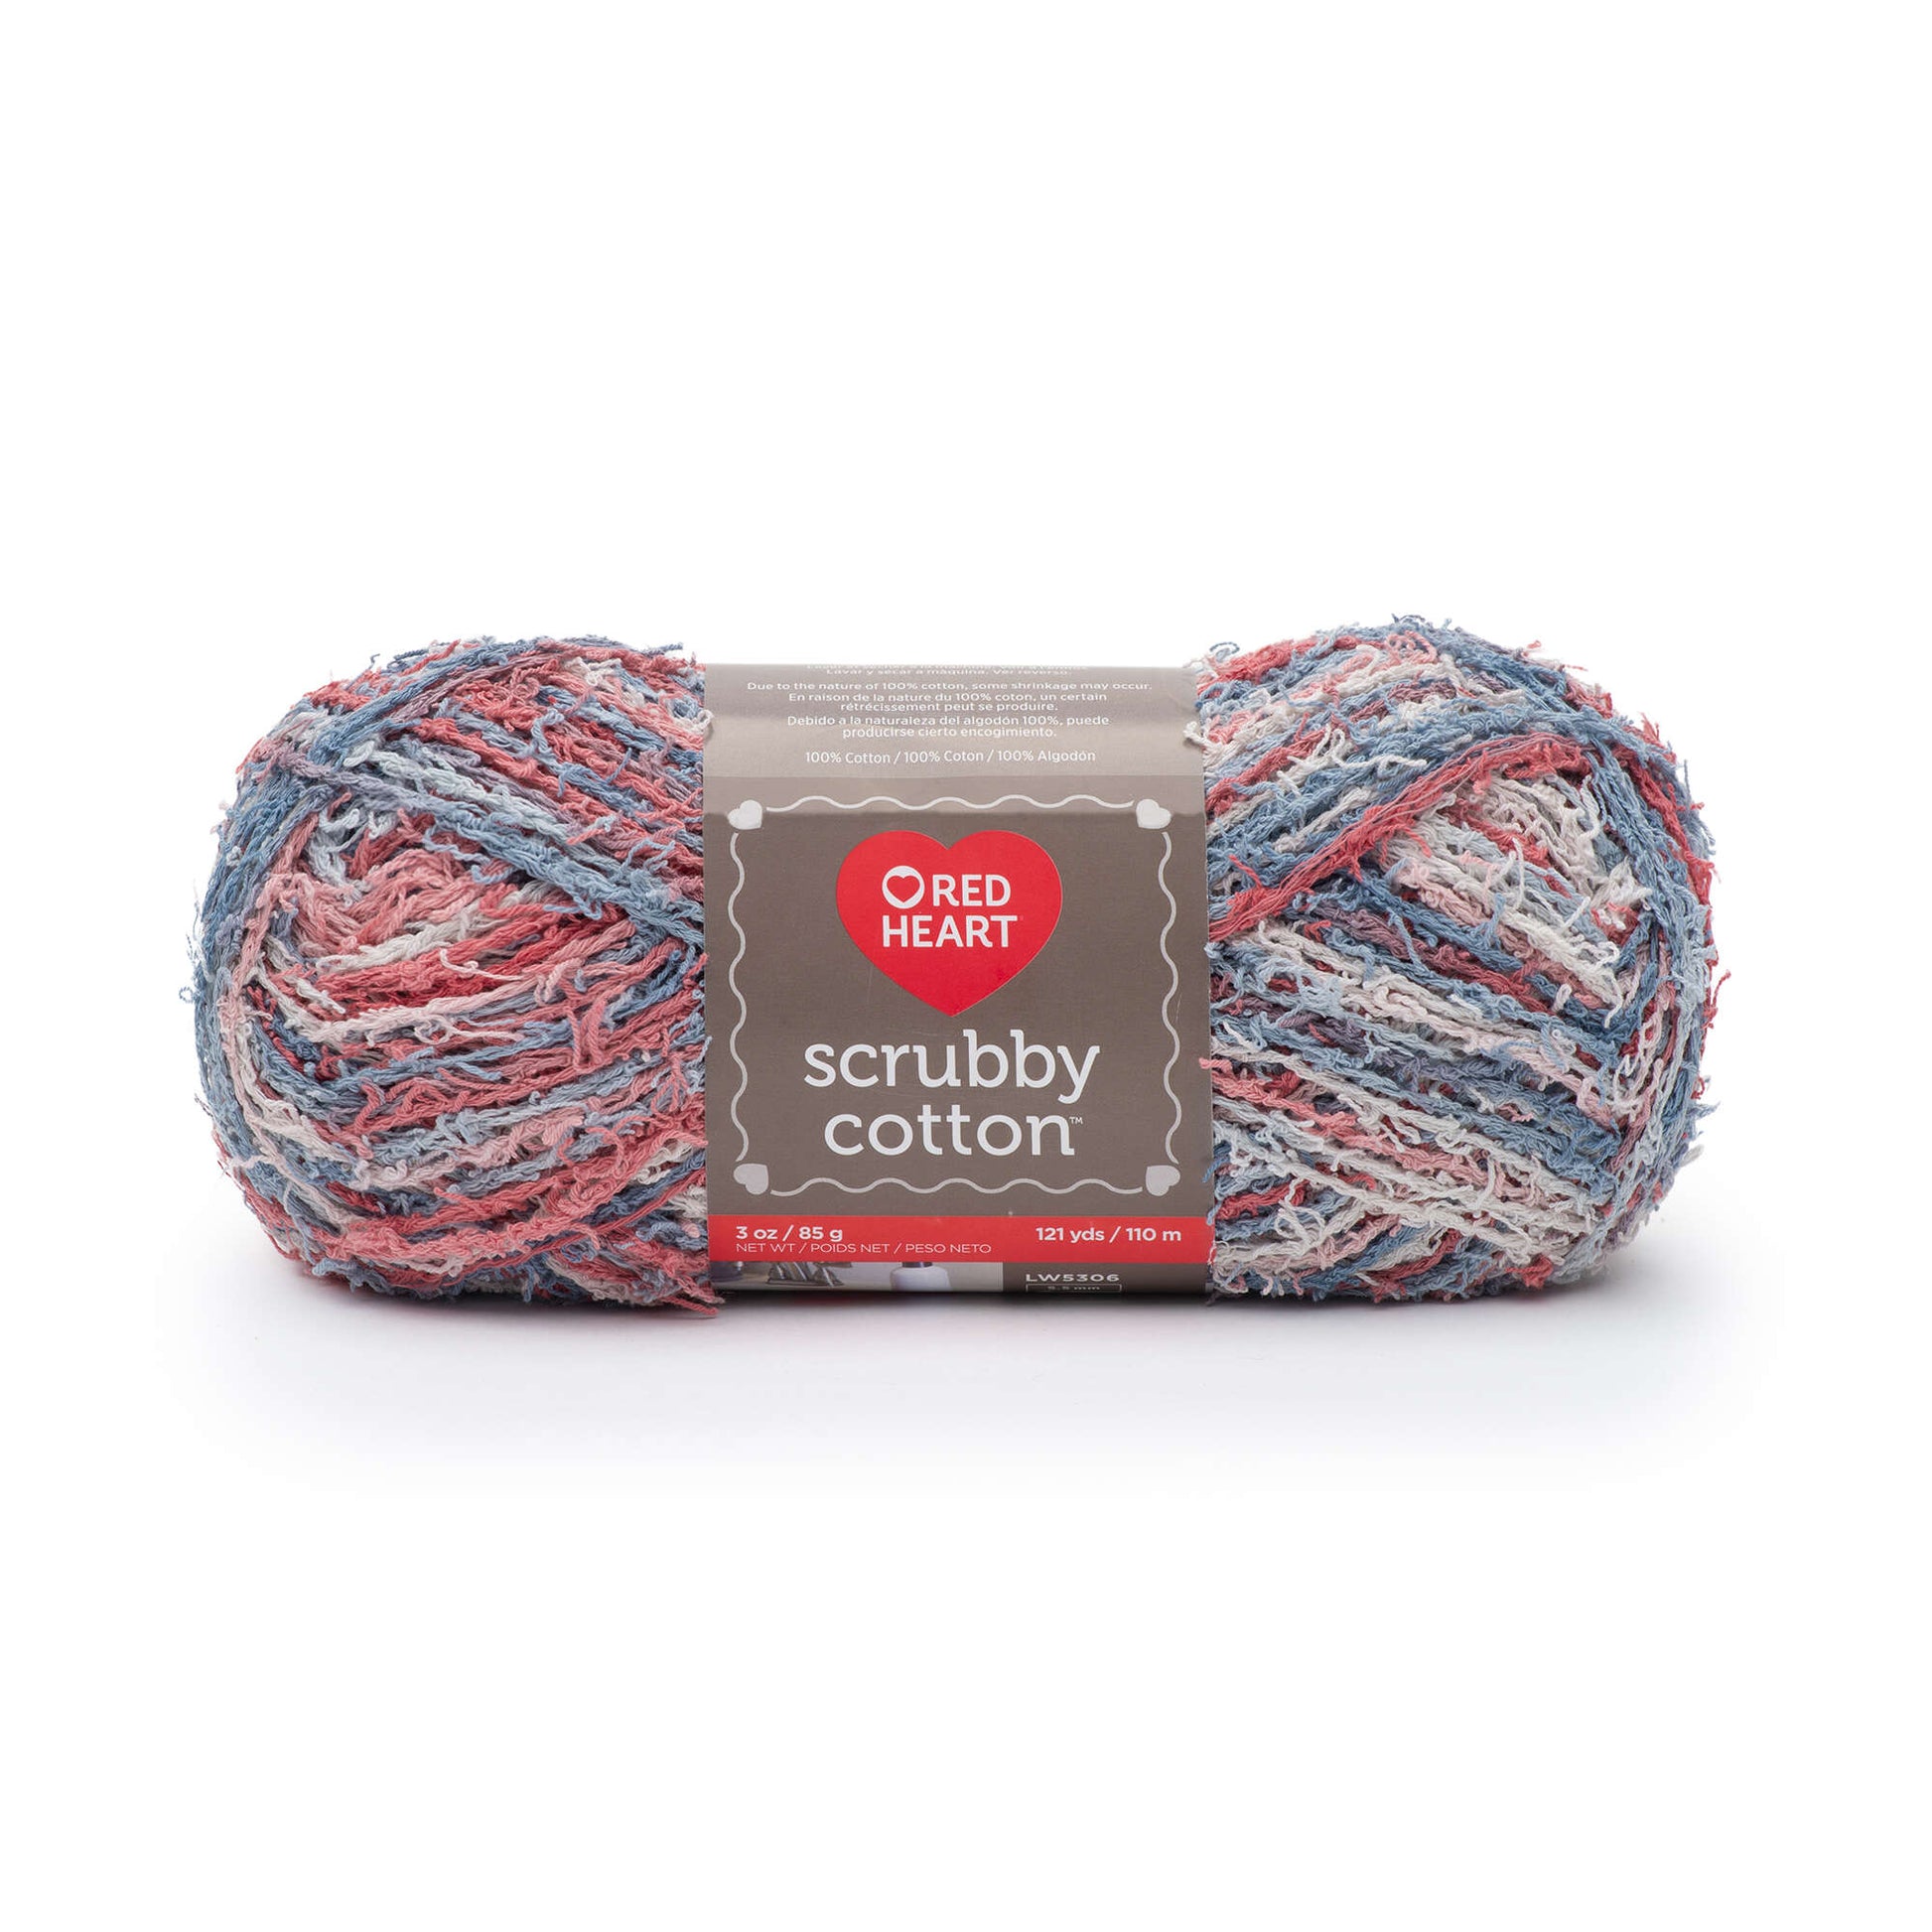 Red Heart Scrubby Cotton Yarn - Discontinued shades Nautical Print